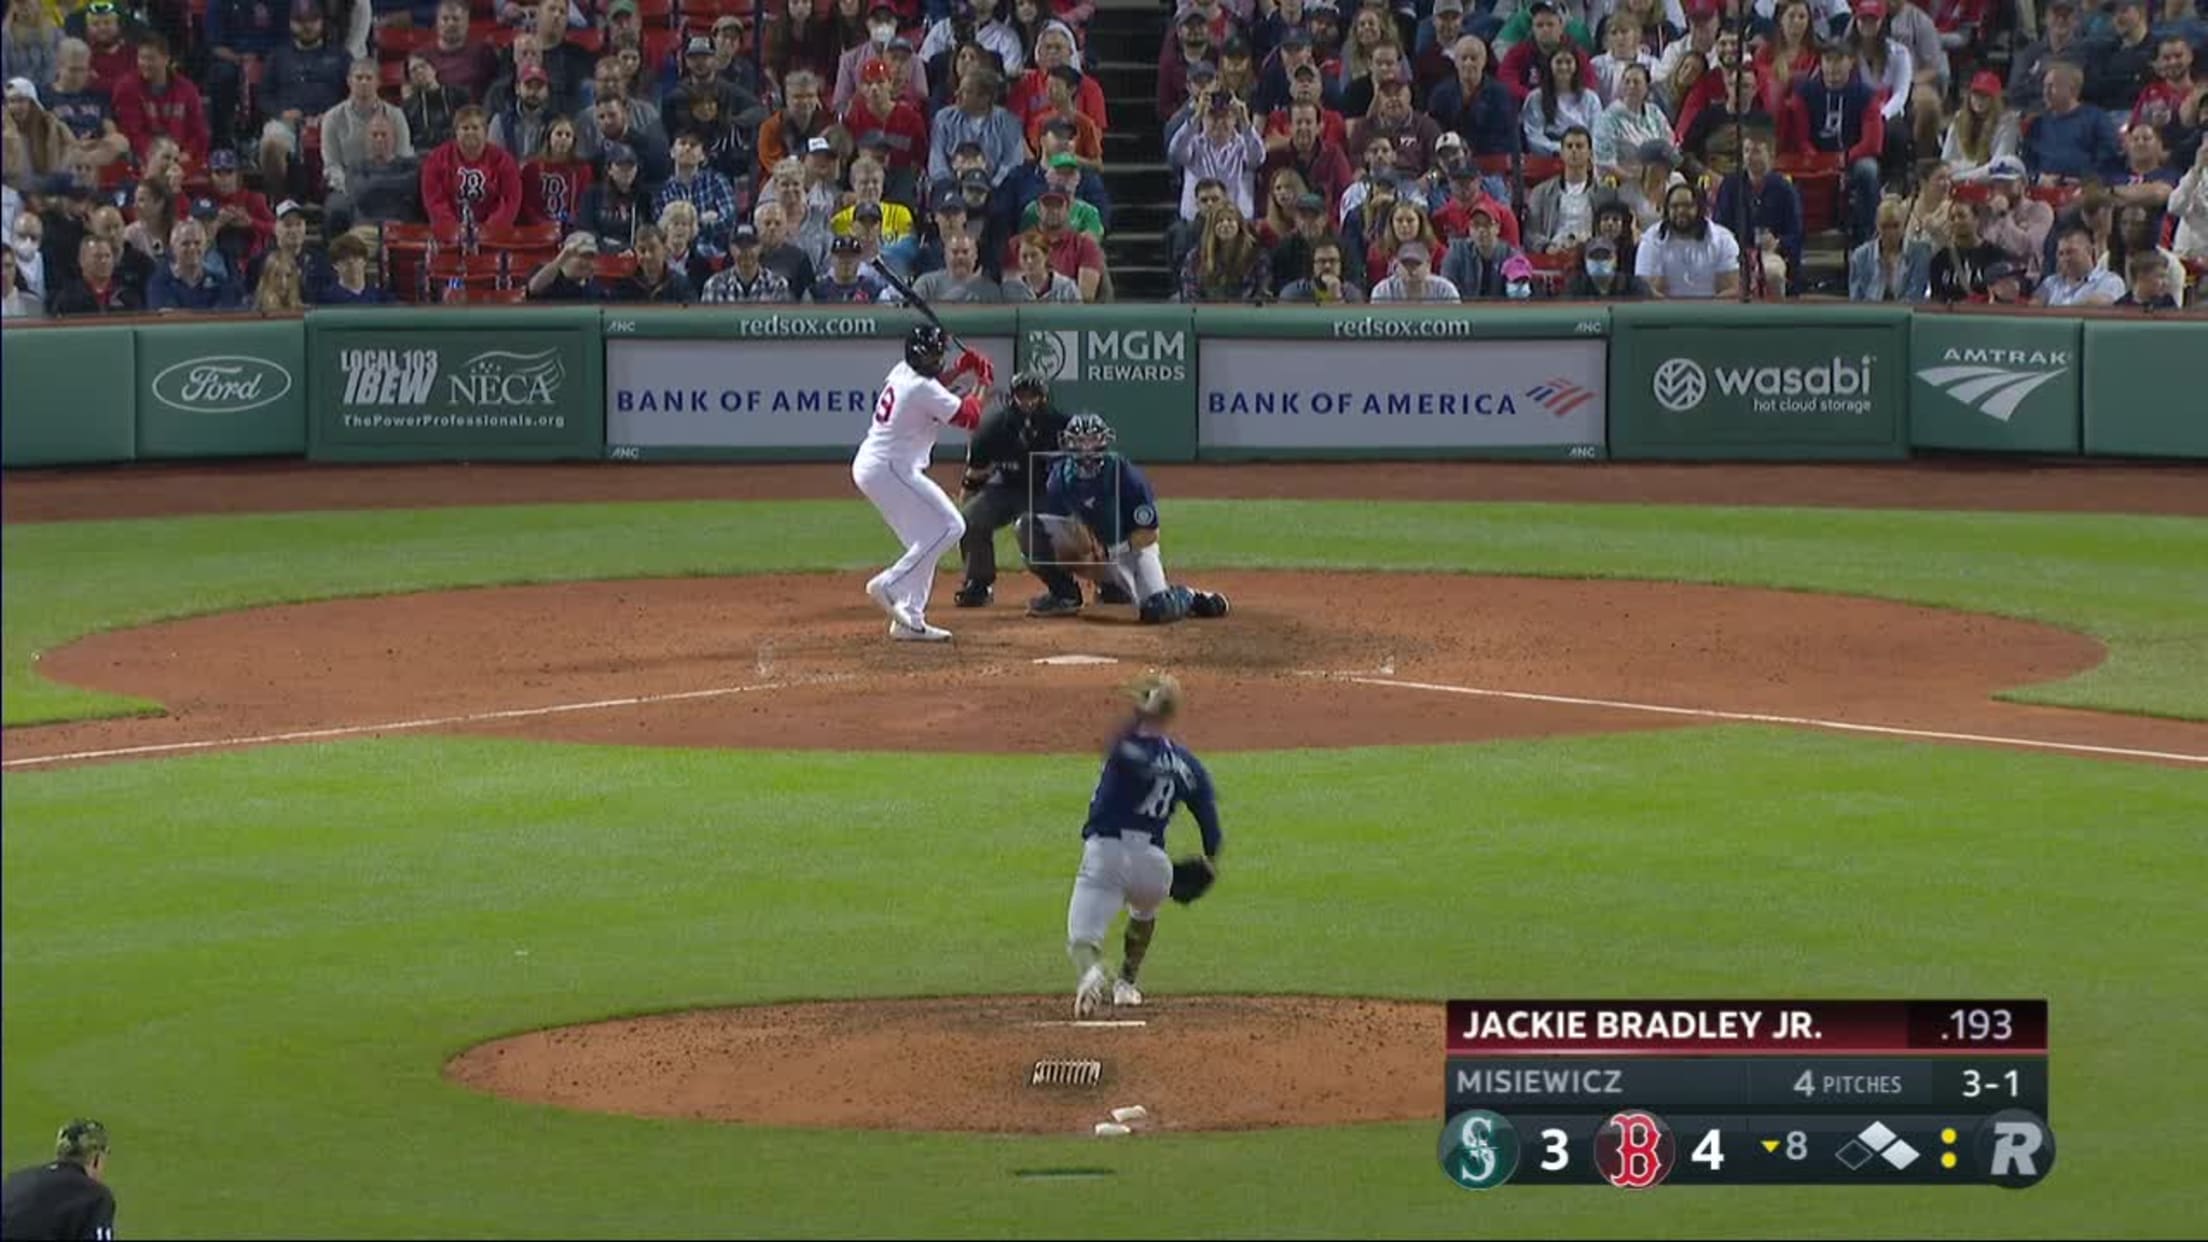 Jackie Bradley, Jr.'s slide kicked off an 8-run inning for the Red